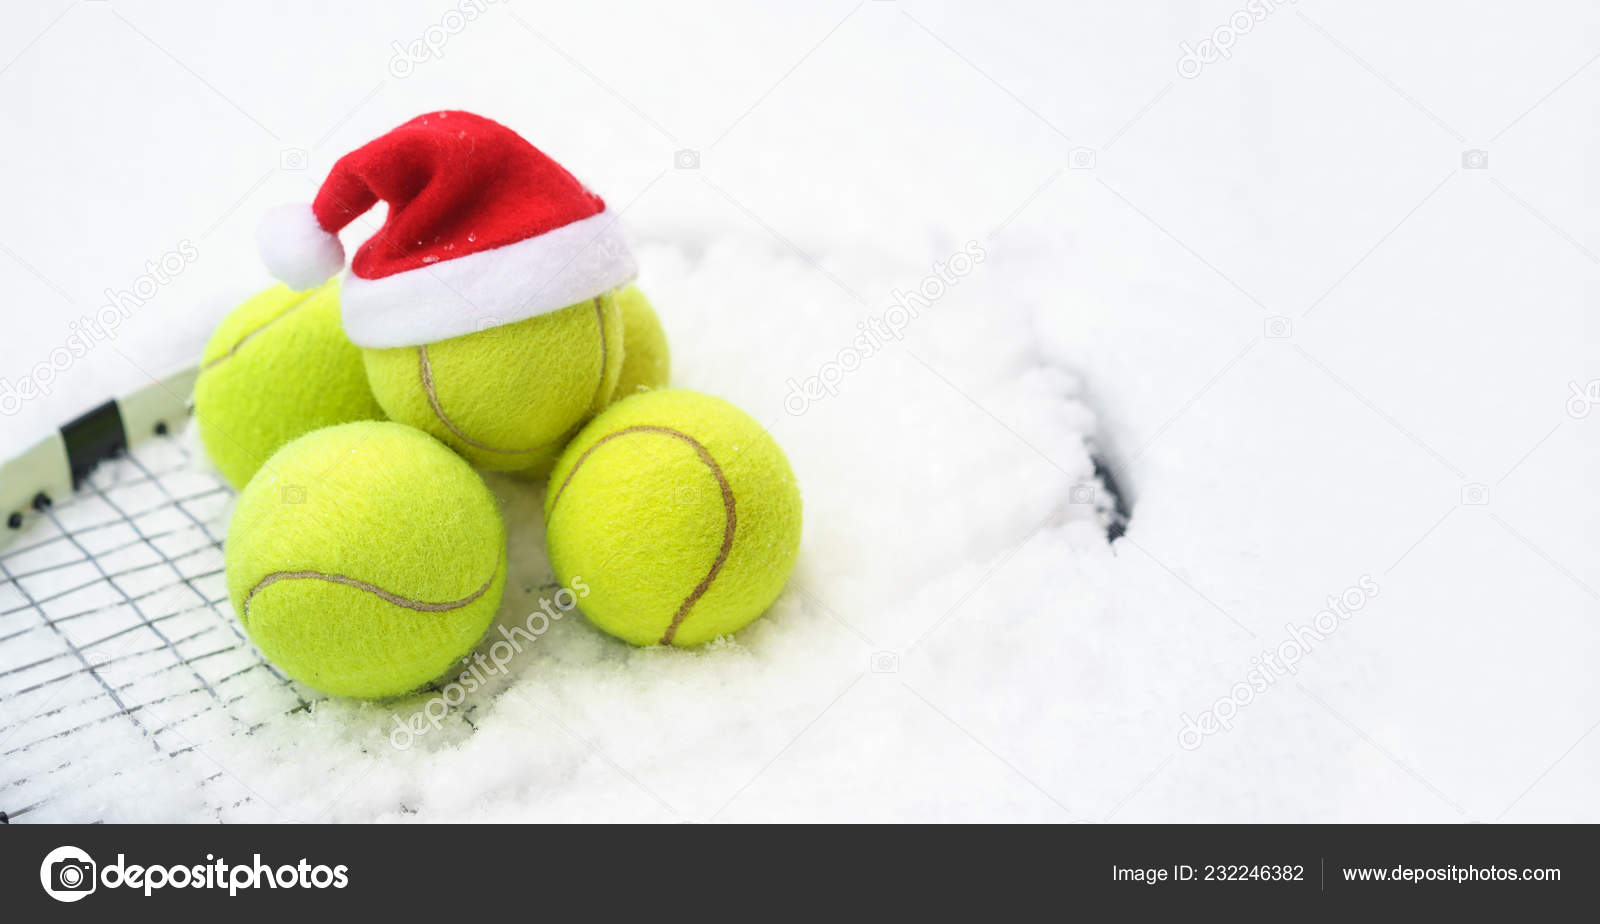 Santa hat on tennis ball, set of tennis balls on racket on white snow winter  background. Merry Christmas and New year concept with tennis balls play.  Close up, sport lifestyle, funny. Stock